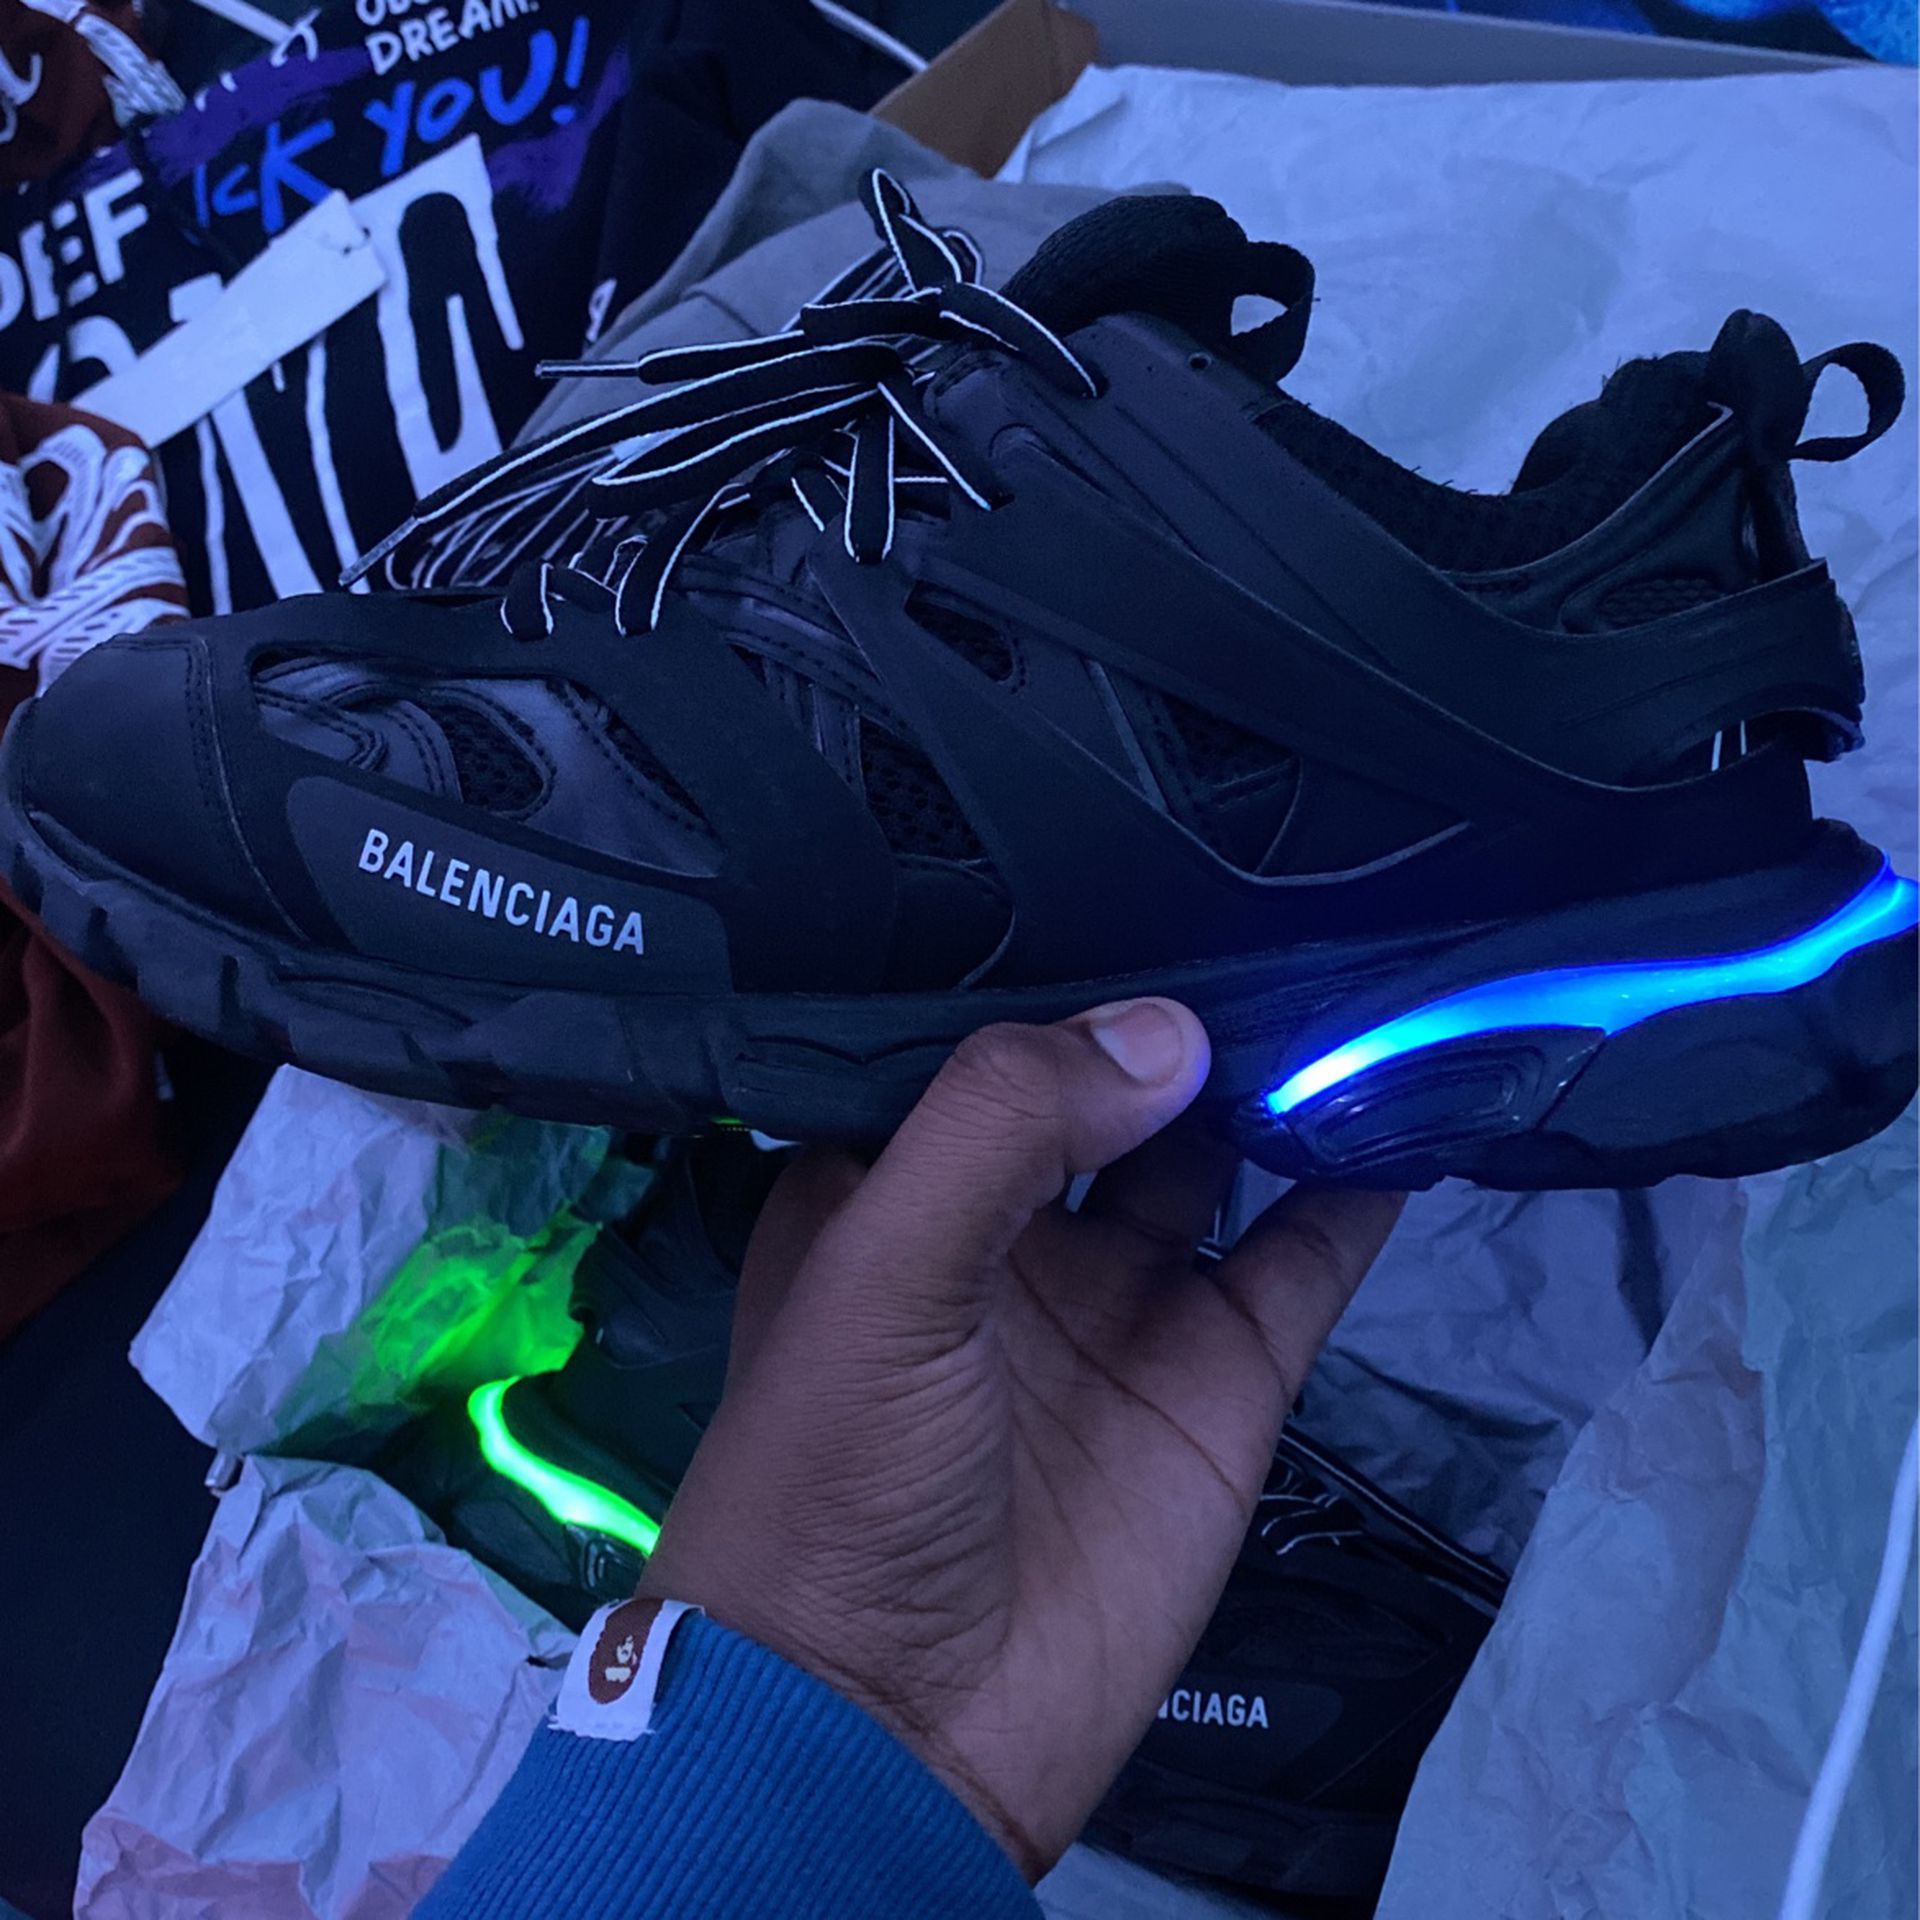 Balenciaga LED Lights Size 44/ Us $500 or $460 for Sale in Detroit, MI - OfferUp